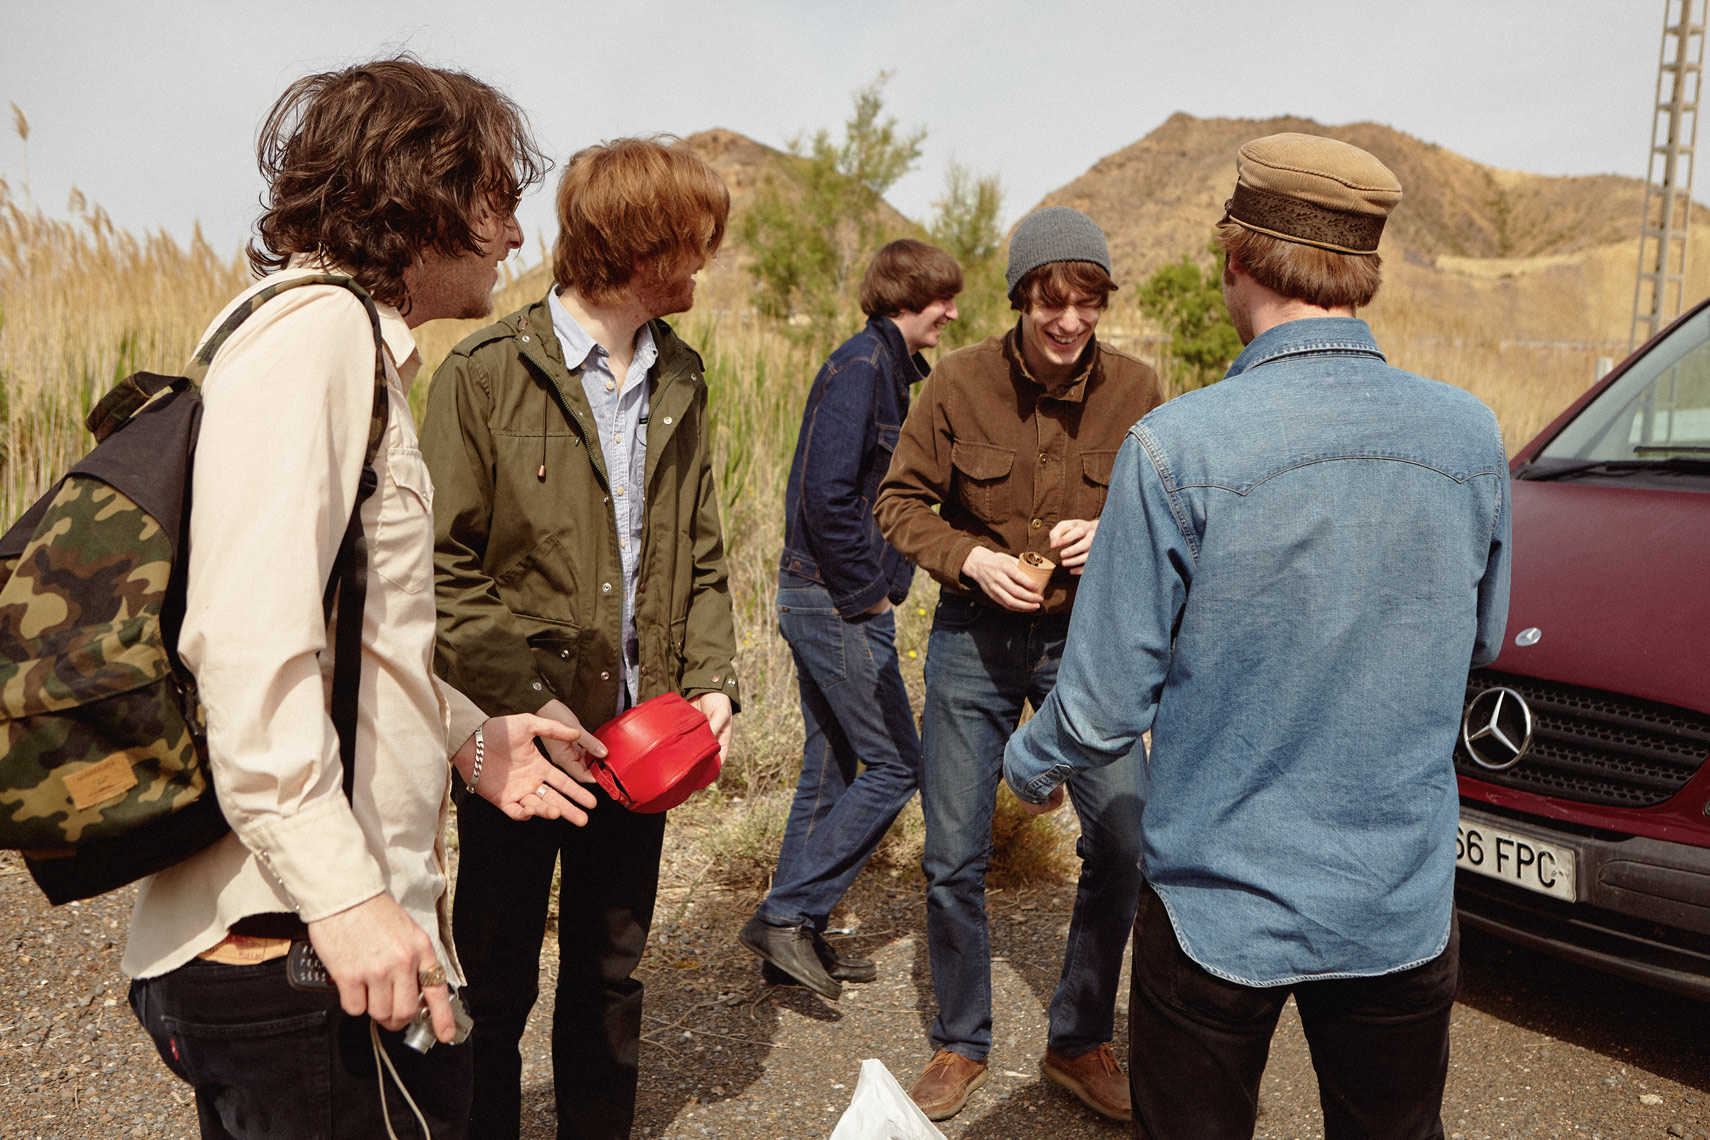 the coral photographed in spain, by tom oxley